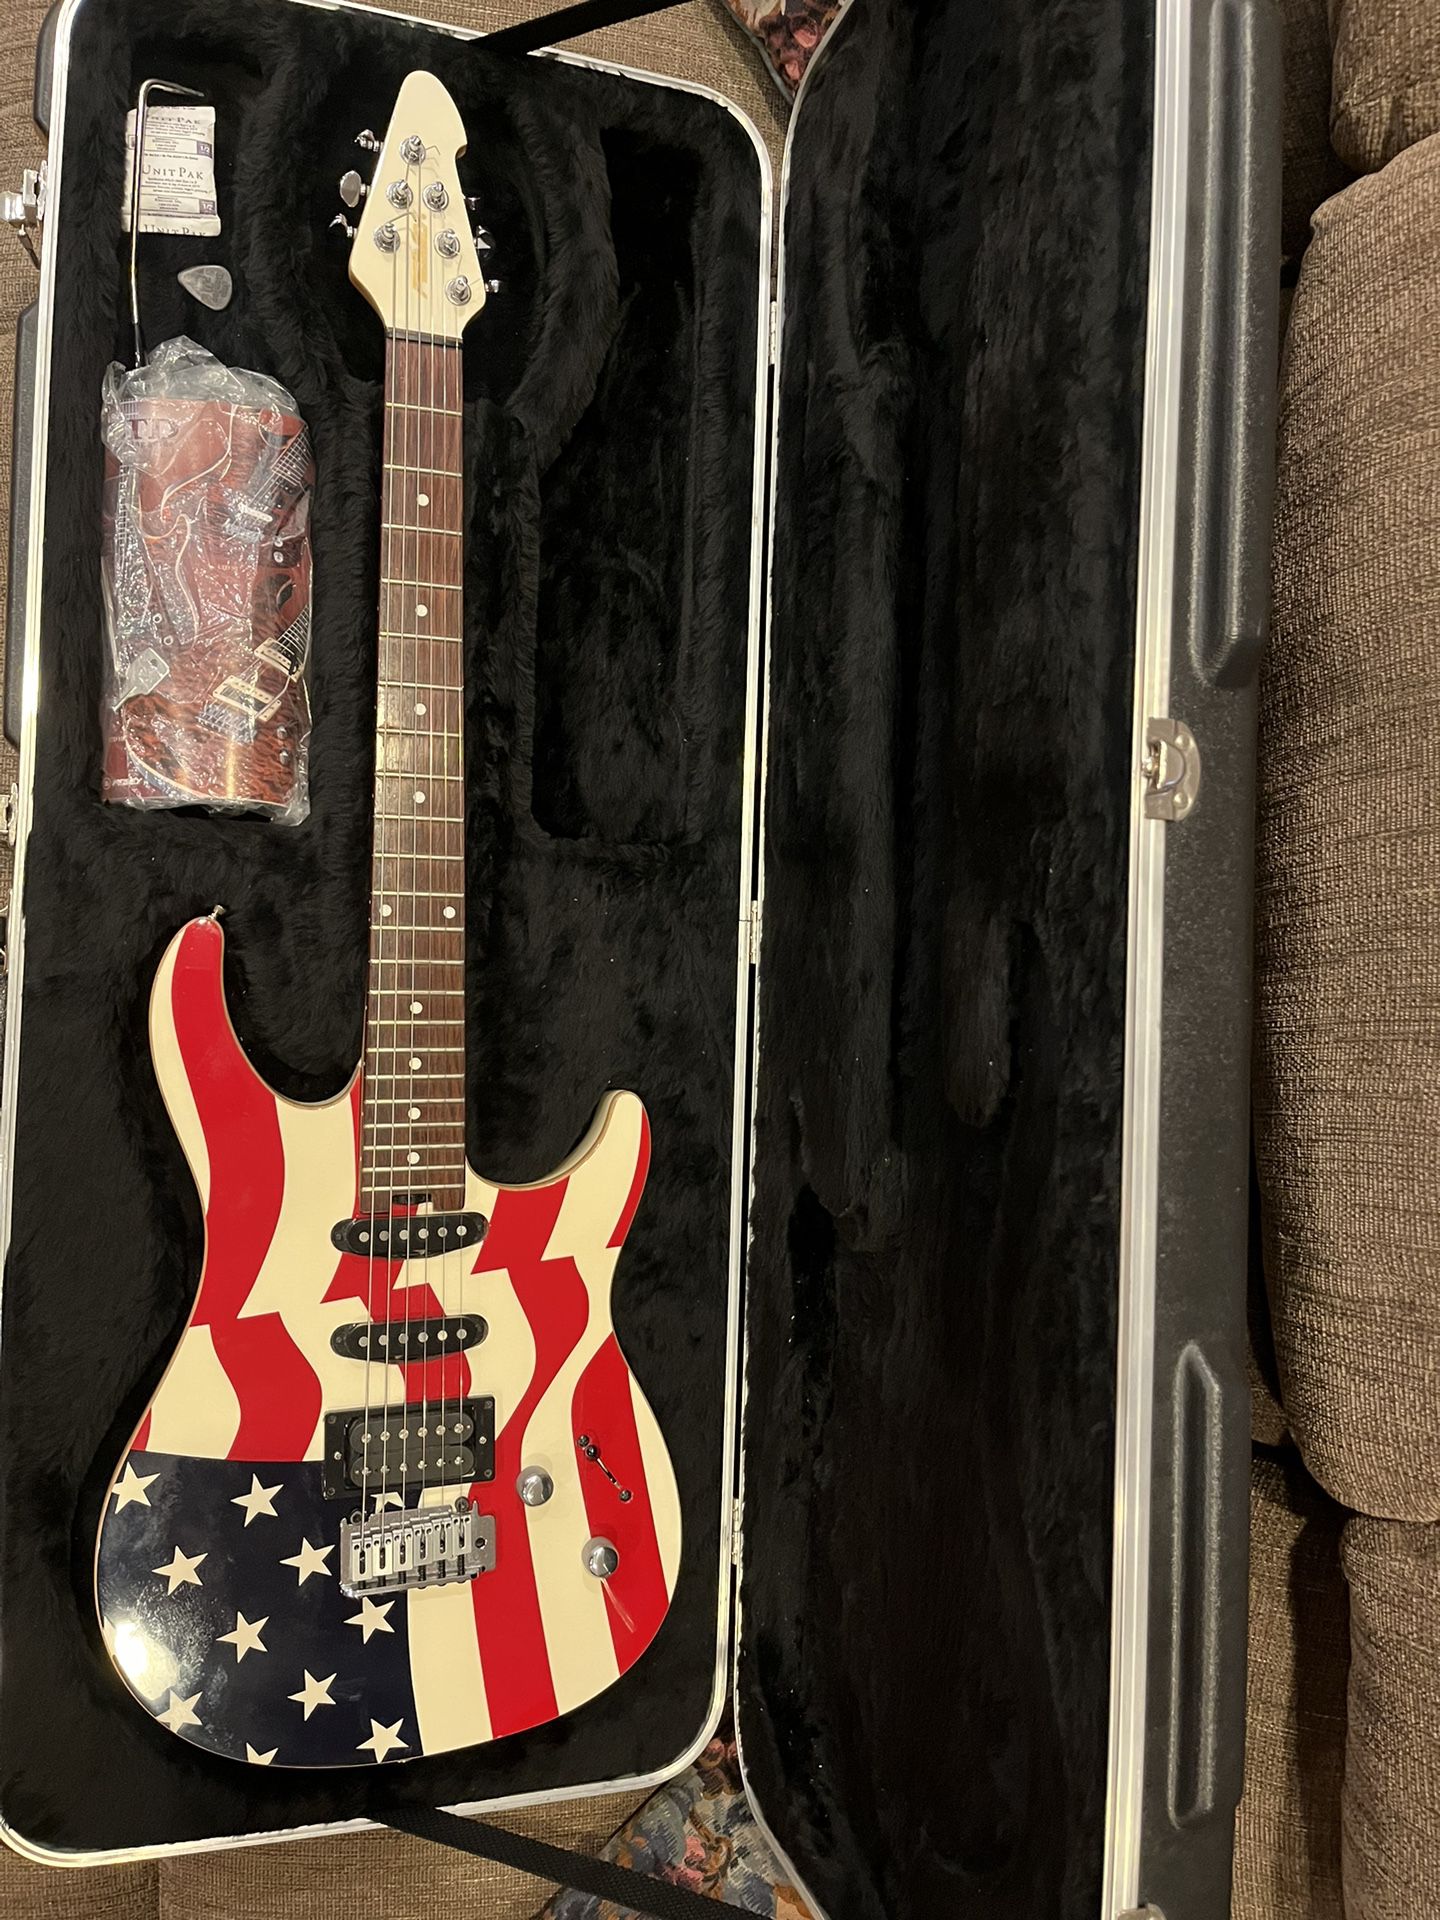 Peavey Limited Edition American Flag LTD-ST Electric Guitar (1 of 150 Ever Made) With OHSC